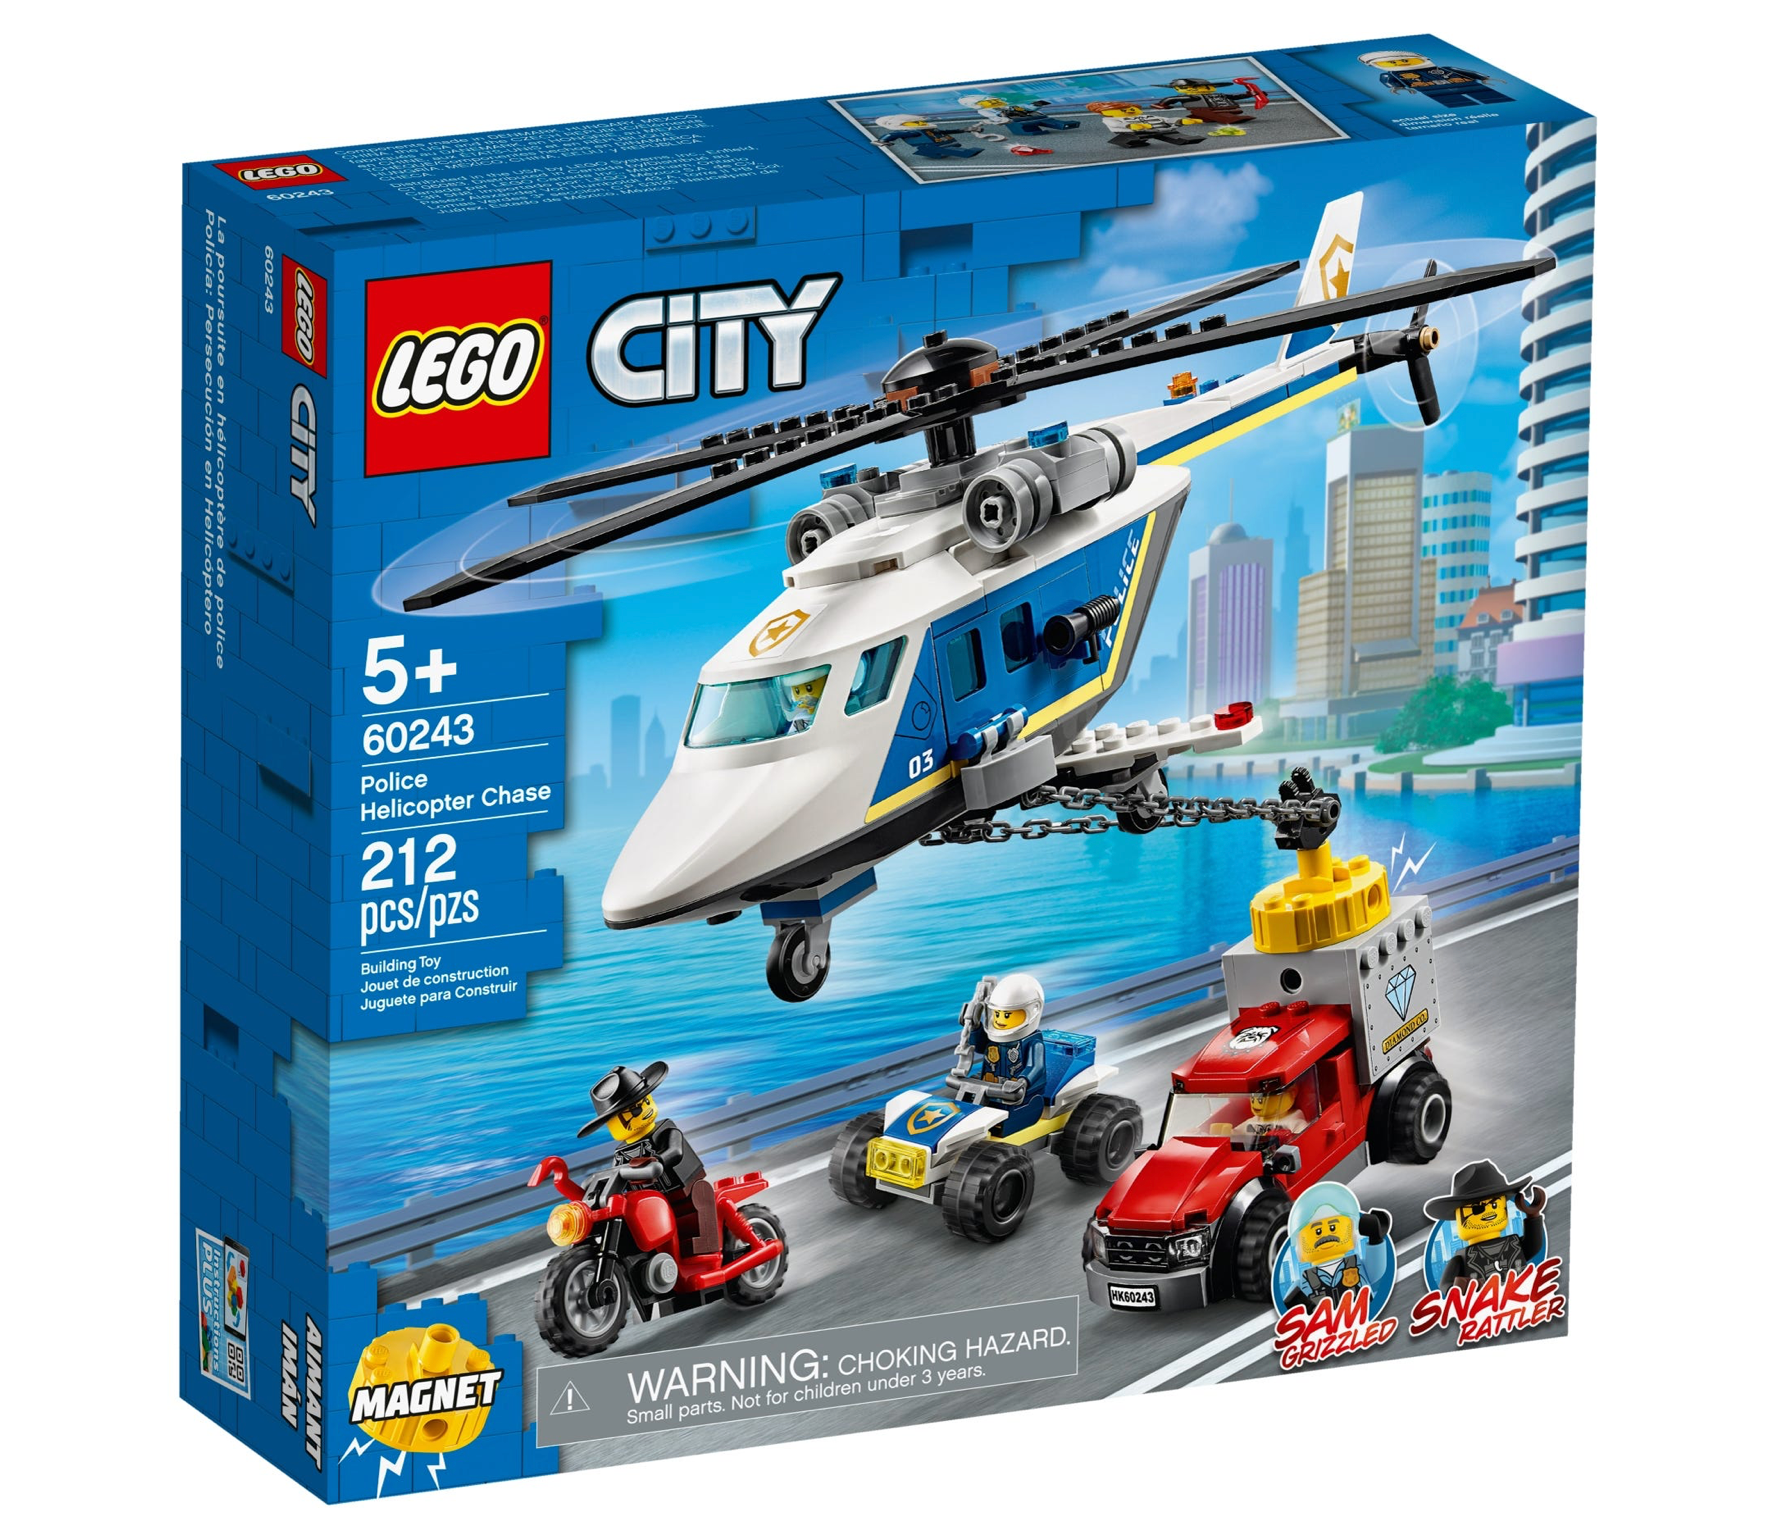 LEGO: City - Police Helicopter Chase